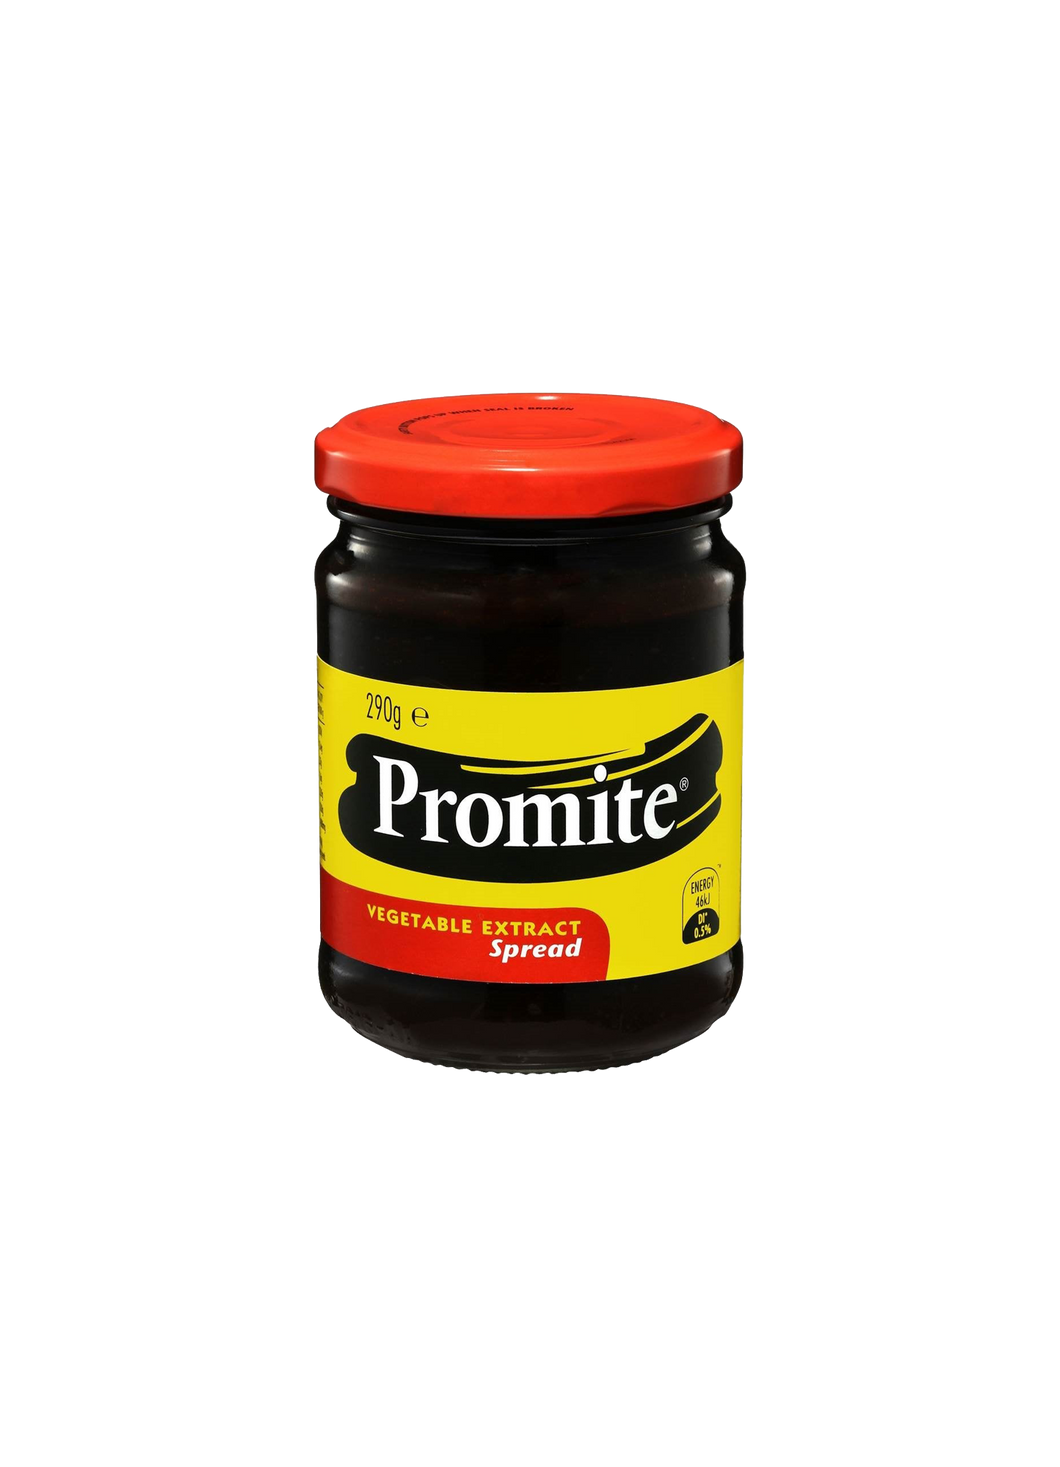 Promite Vegetable Extract Spread (290g)